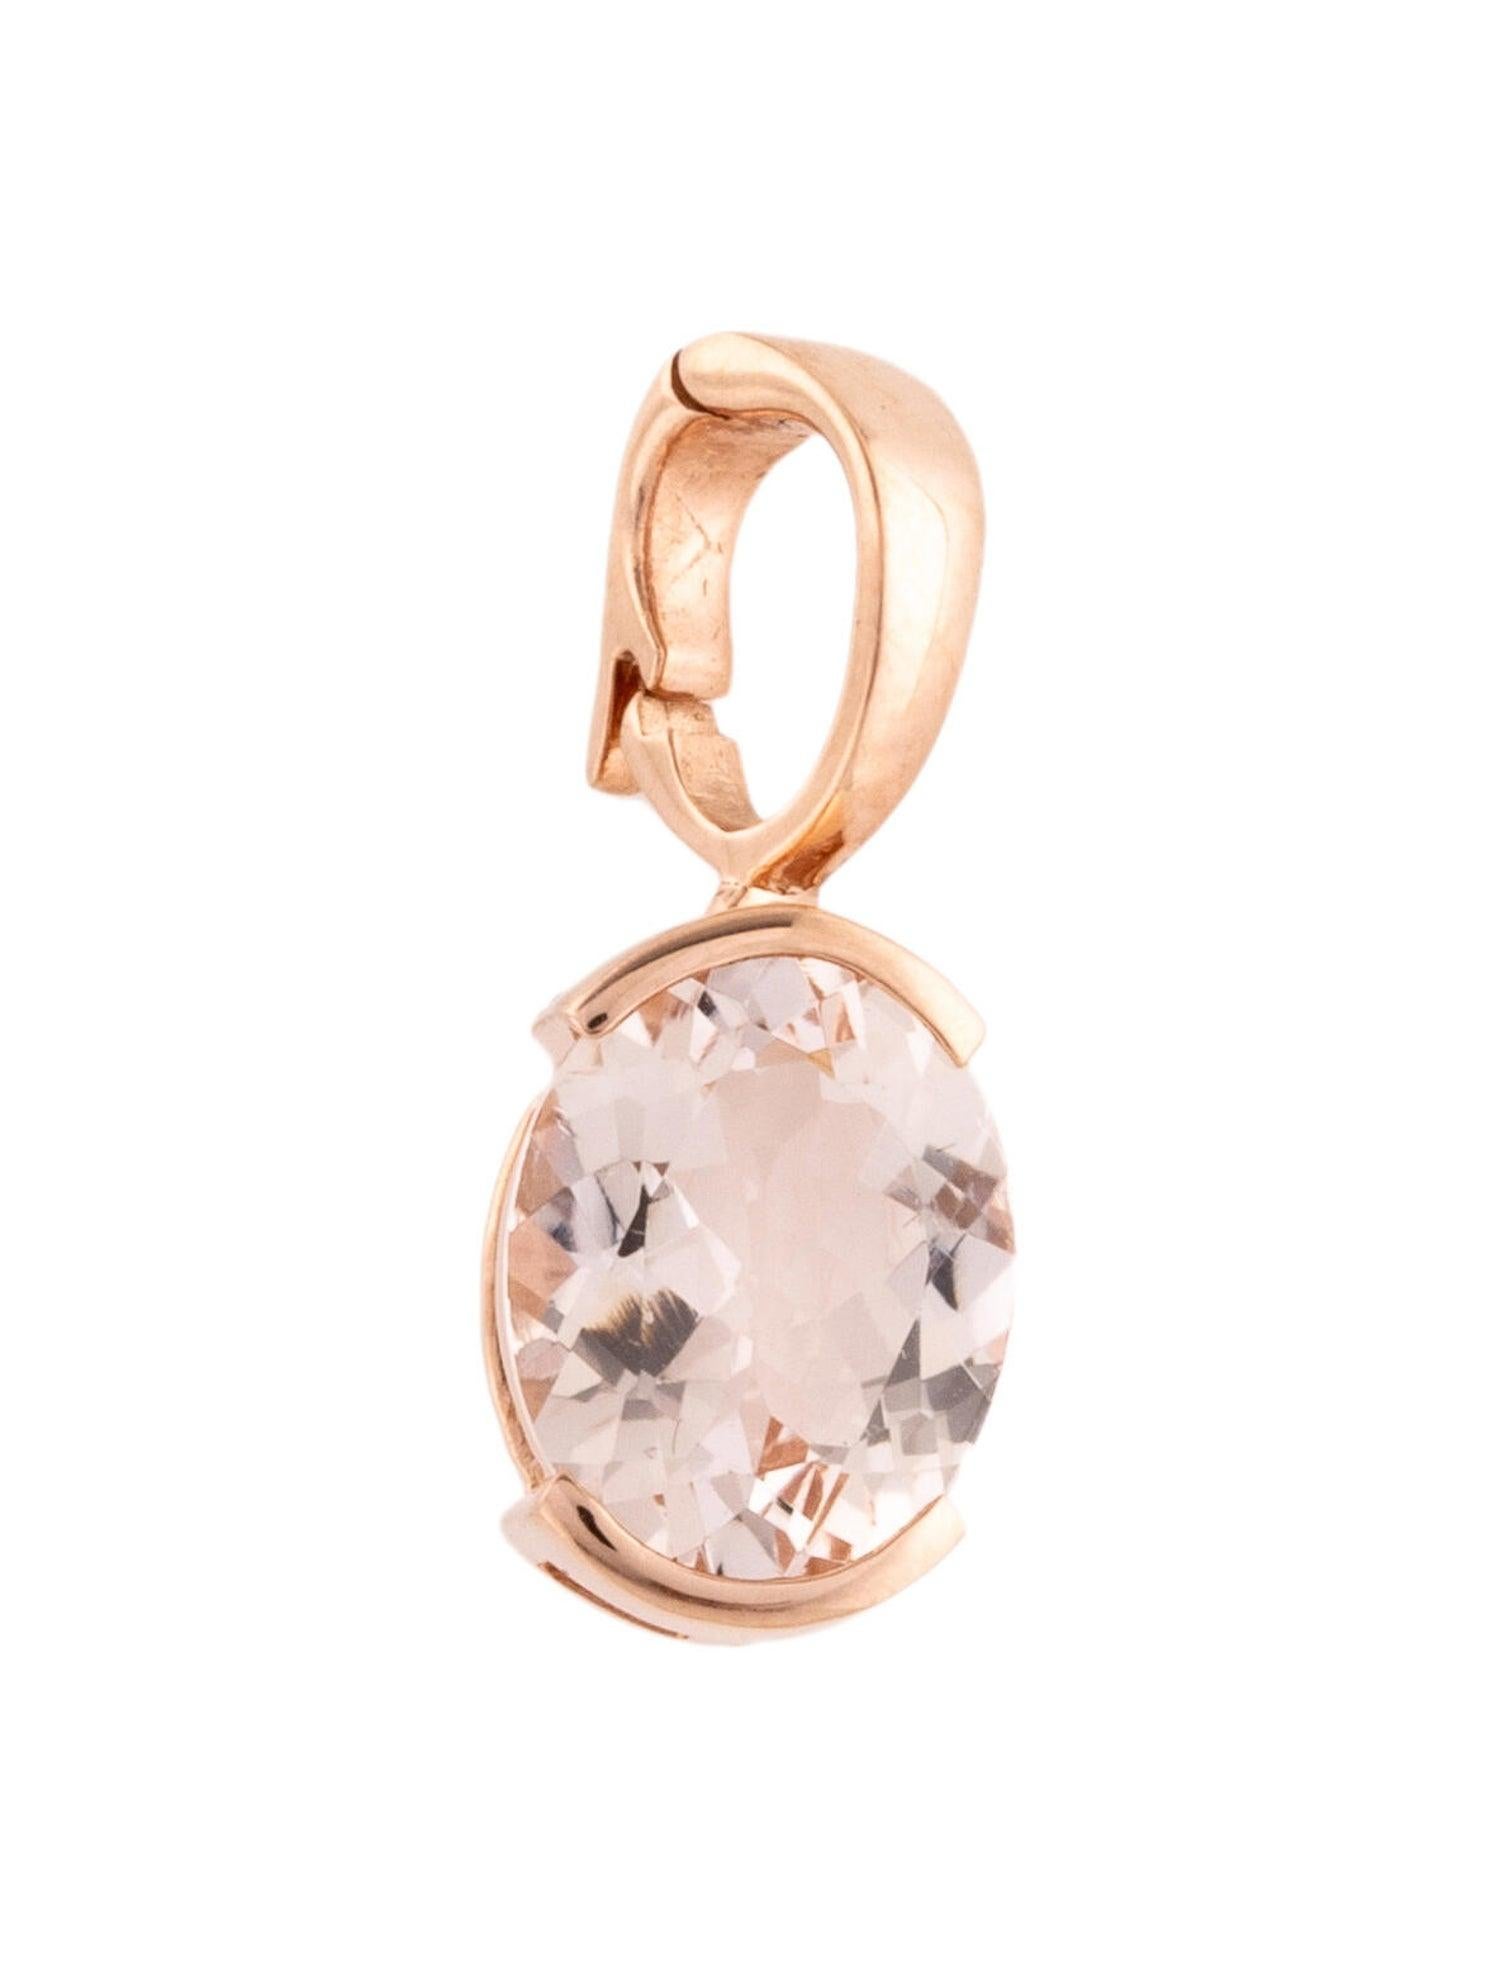 Luxury 14K 2.50ctw Morganite Pendant - Exquisite Gemstone Statement in Rose Gold In New Condition For Sale In Holtsville, NY